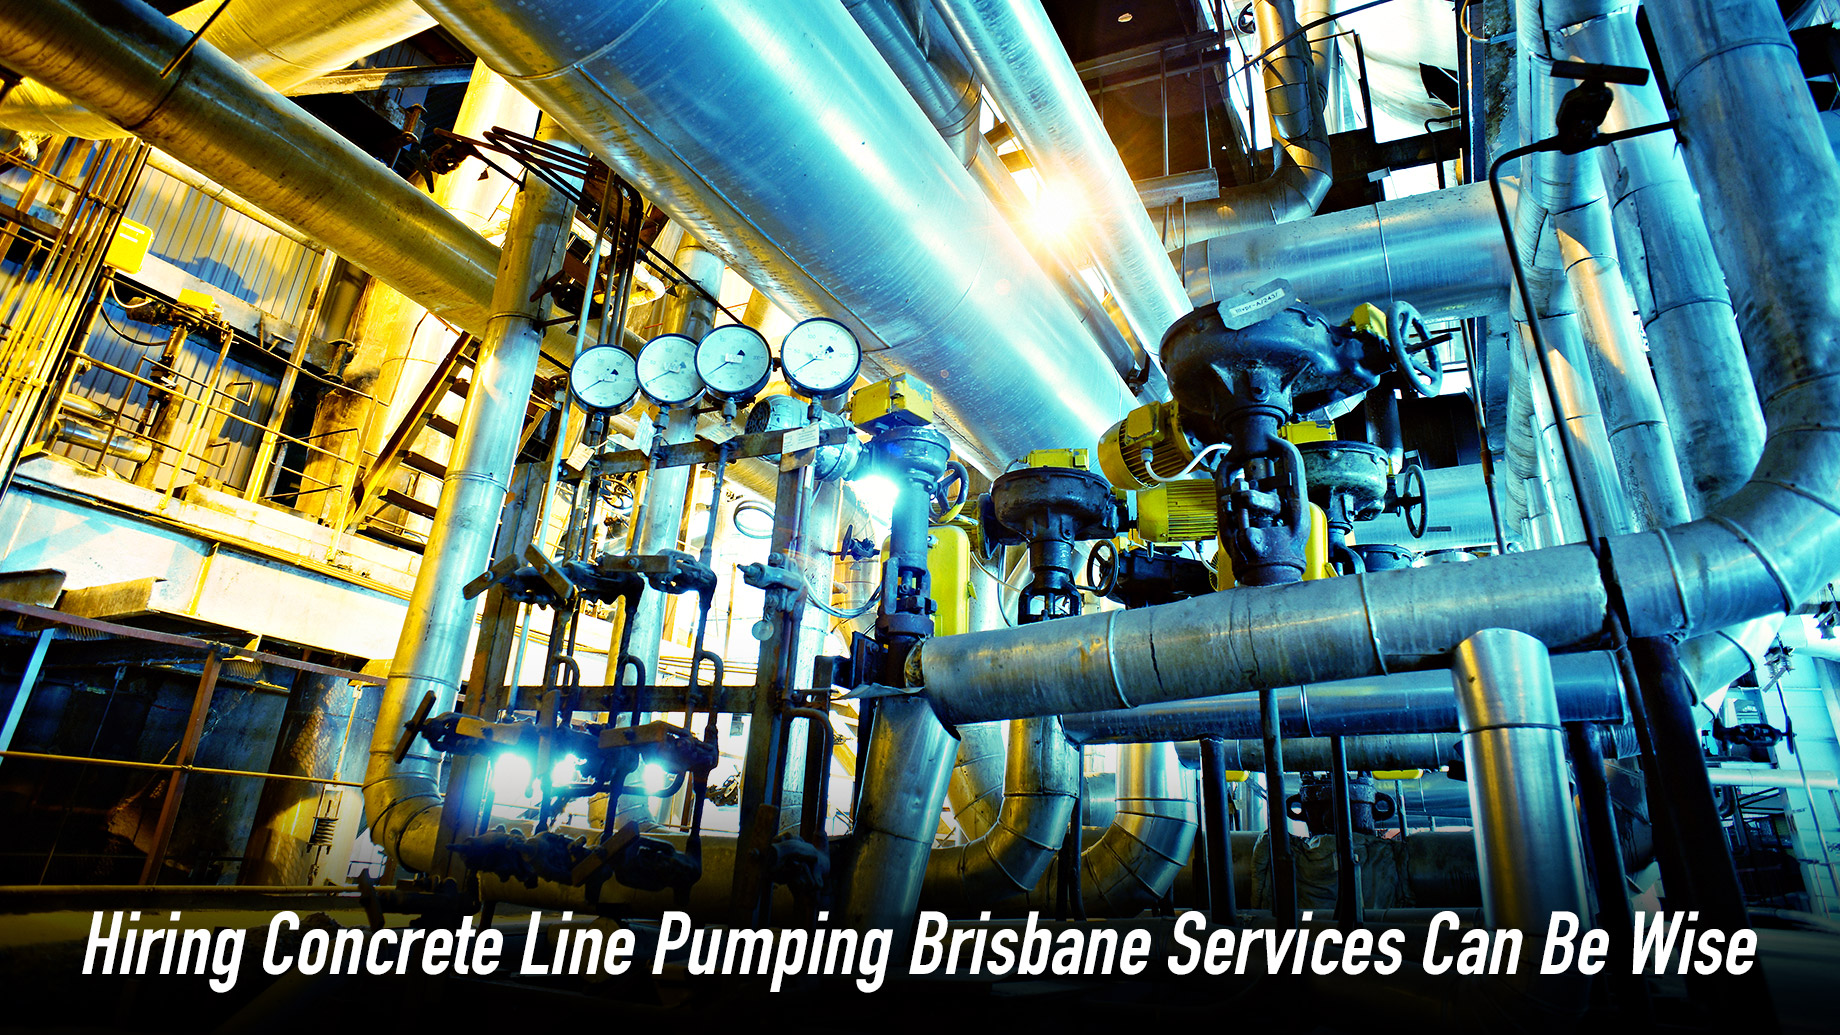 Hiring Concrete Line Pumping Brisbane Services Can Be Wise